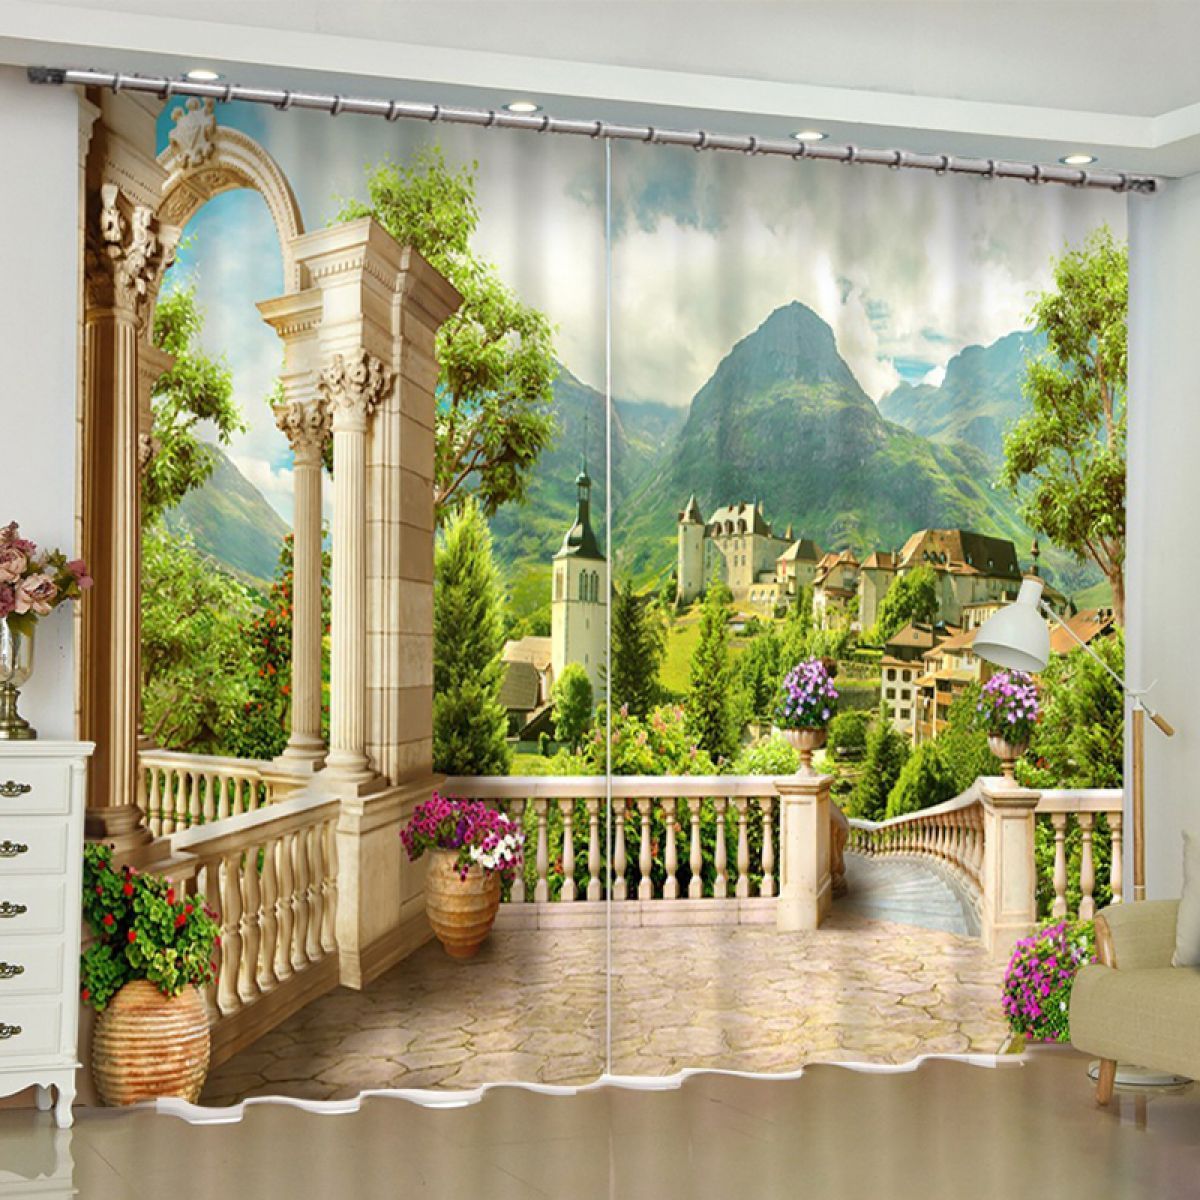 european garden and building view printed window curtain home decor 7578